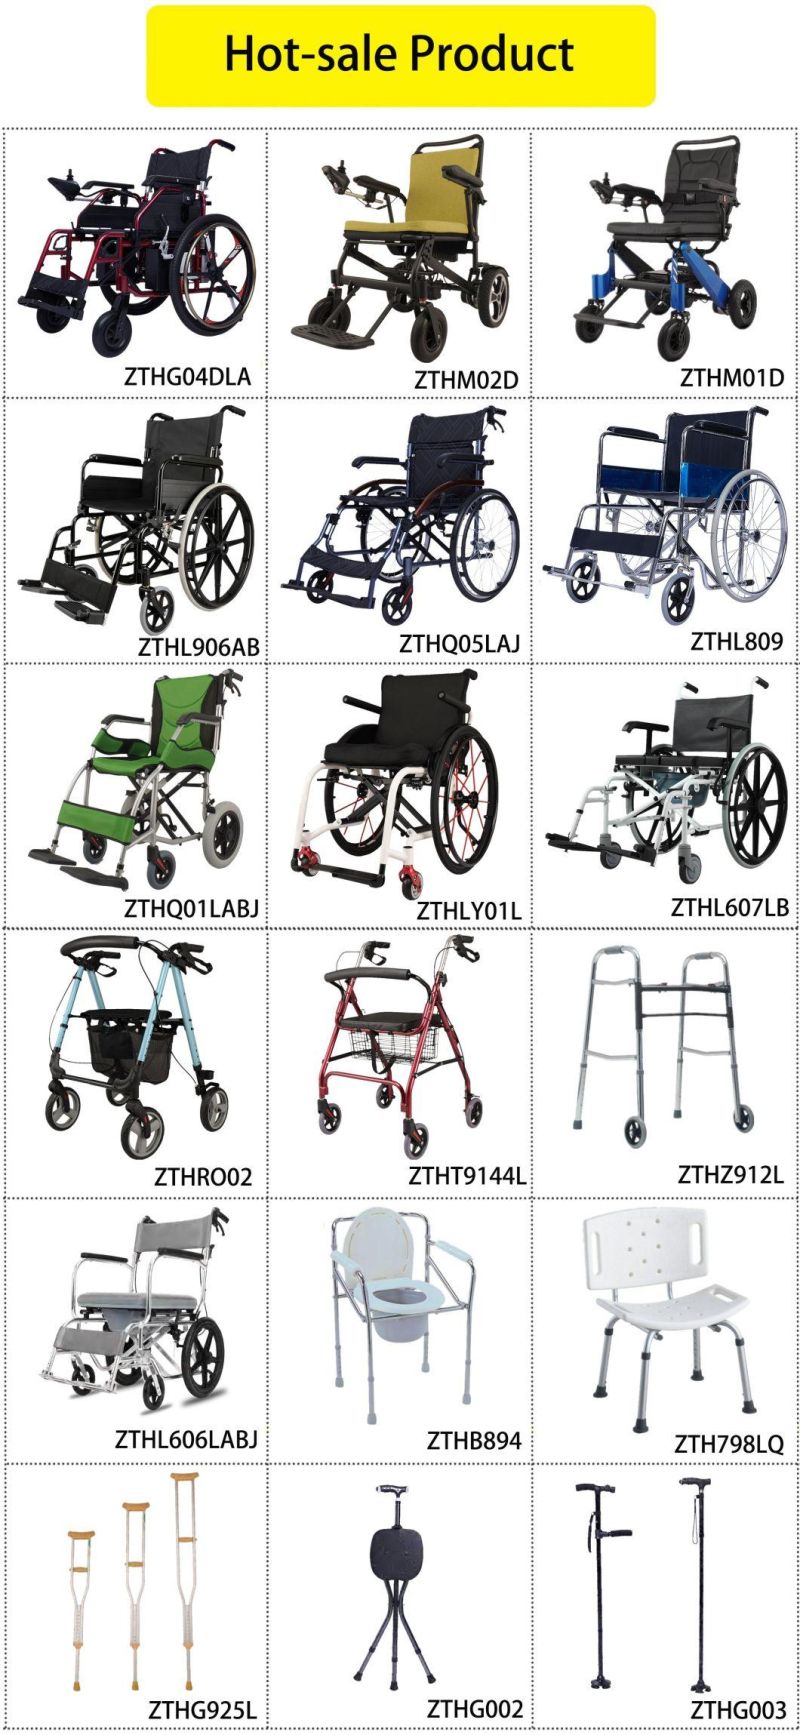 Non-Slip Hand Grip and Non-Slip Foot Pad Aluminum Elder or Disabled People Outdoor Folding Walker Frame Antiskid Safety Light Weight Walking Aid